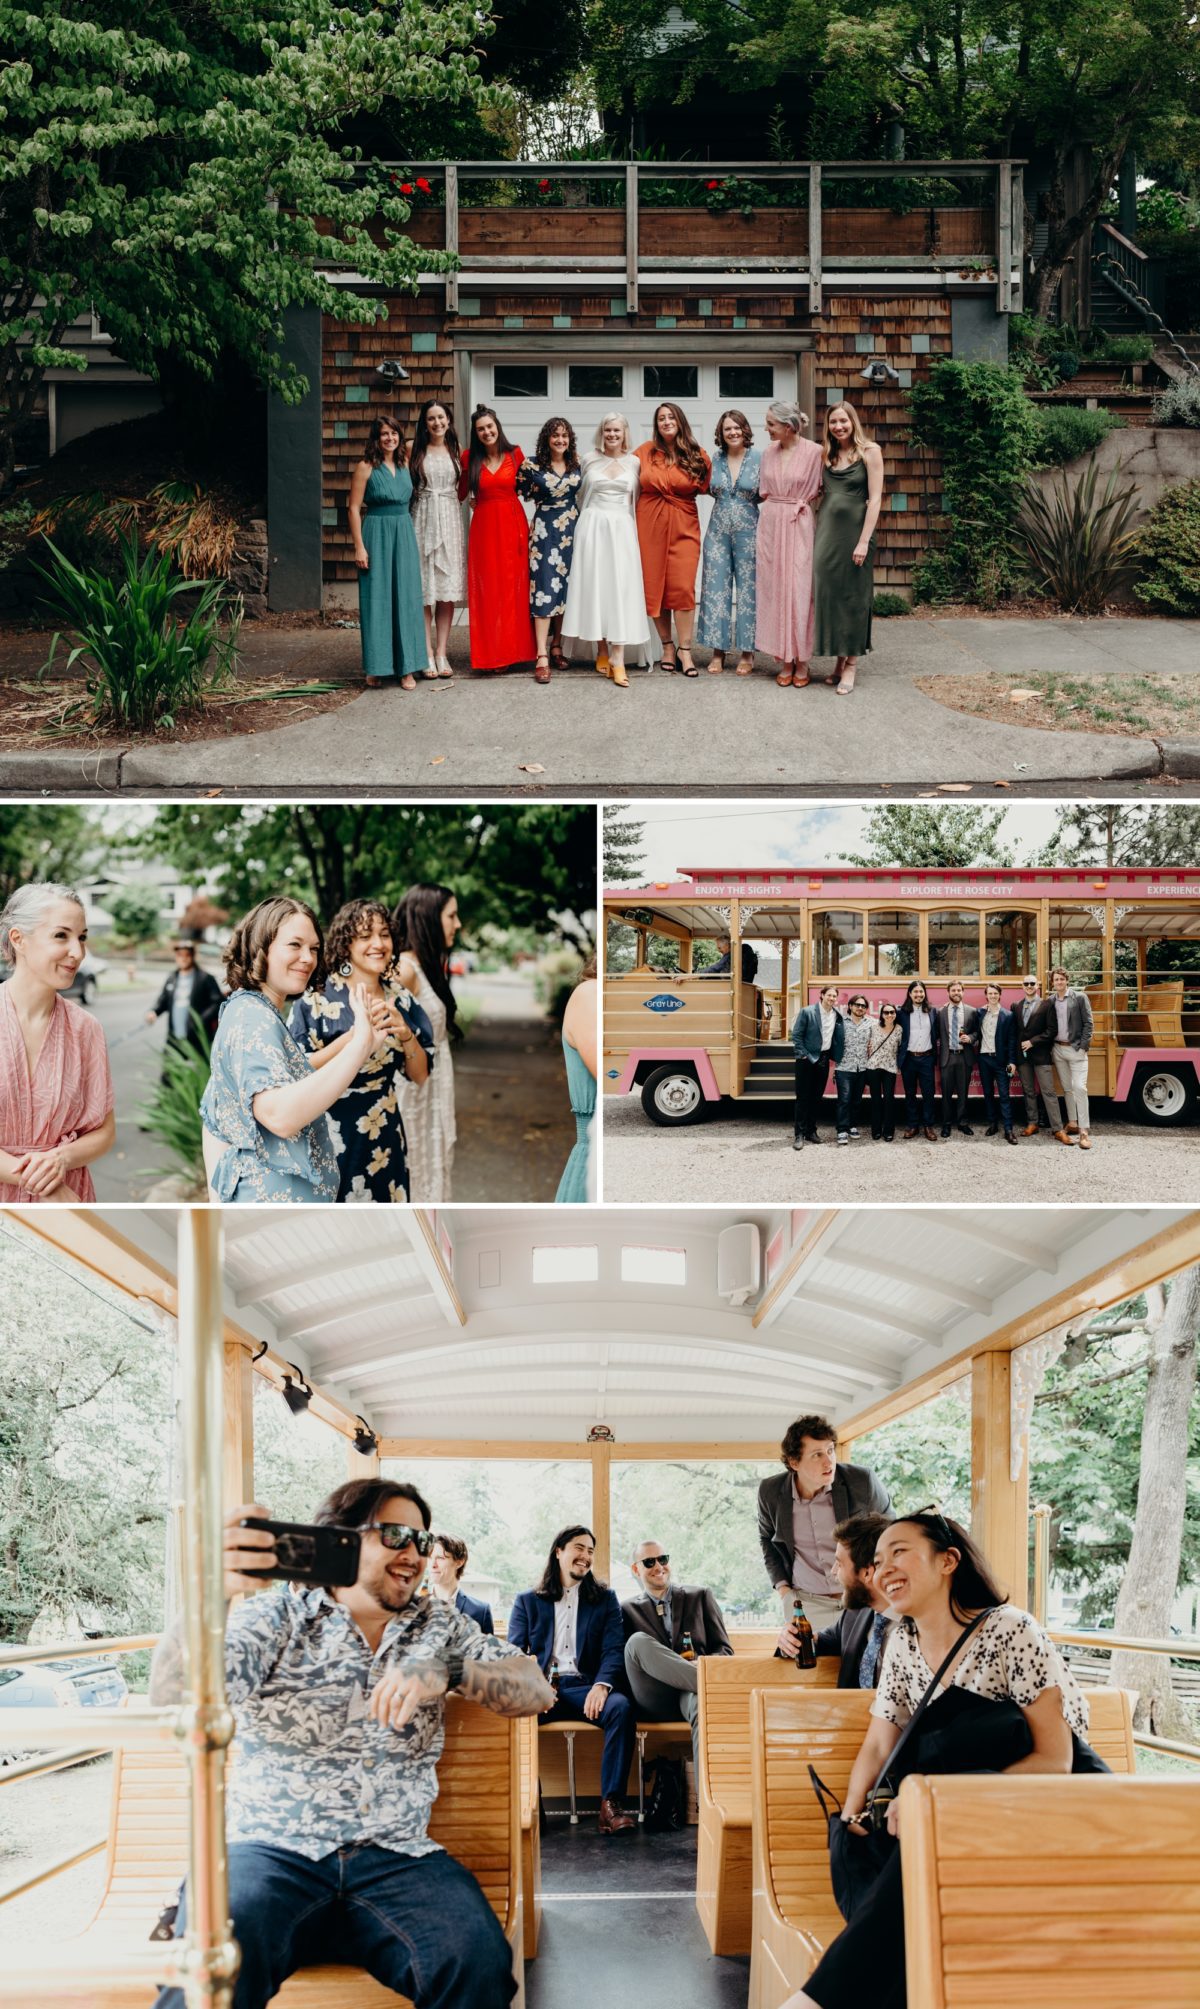 A ride on the pink Portland Trolly! Coopers Hall Wedding photographed by Briana Morrison Photography